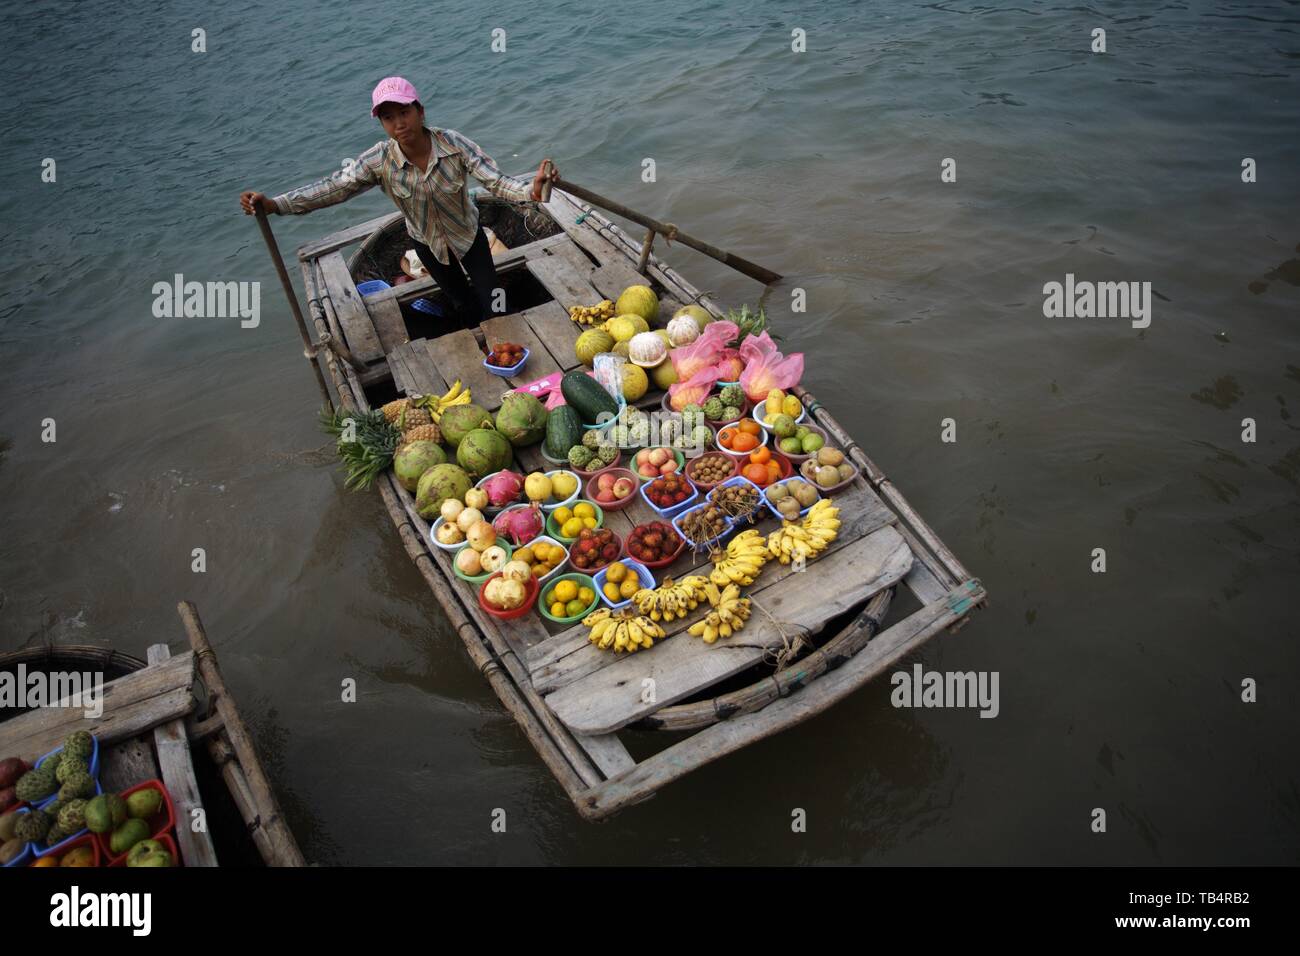 Selling fruit in Halong Bay Stock Photo